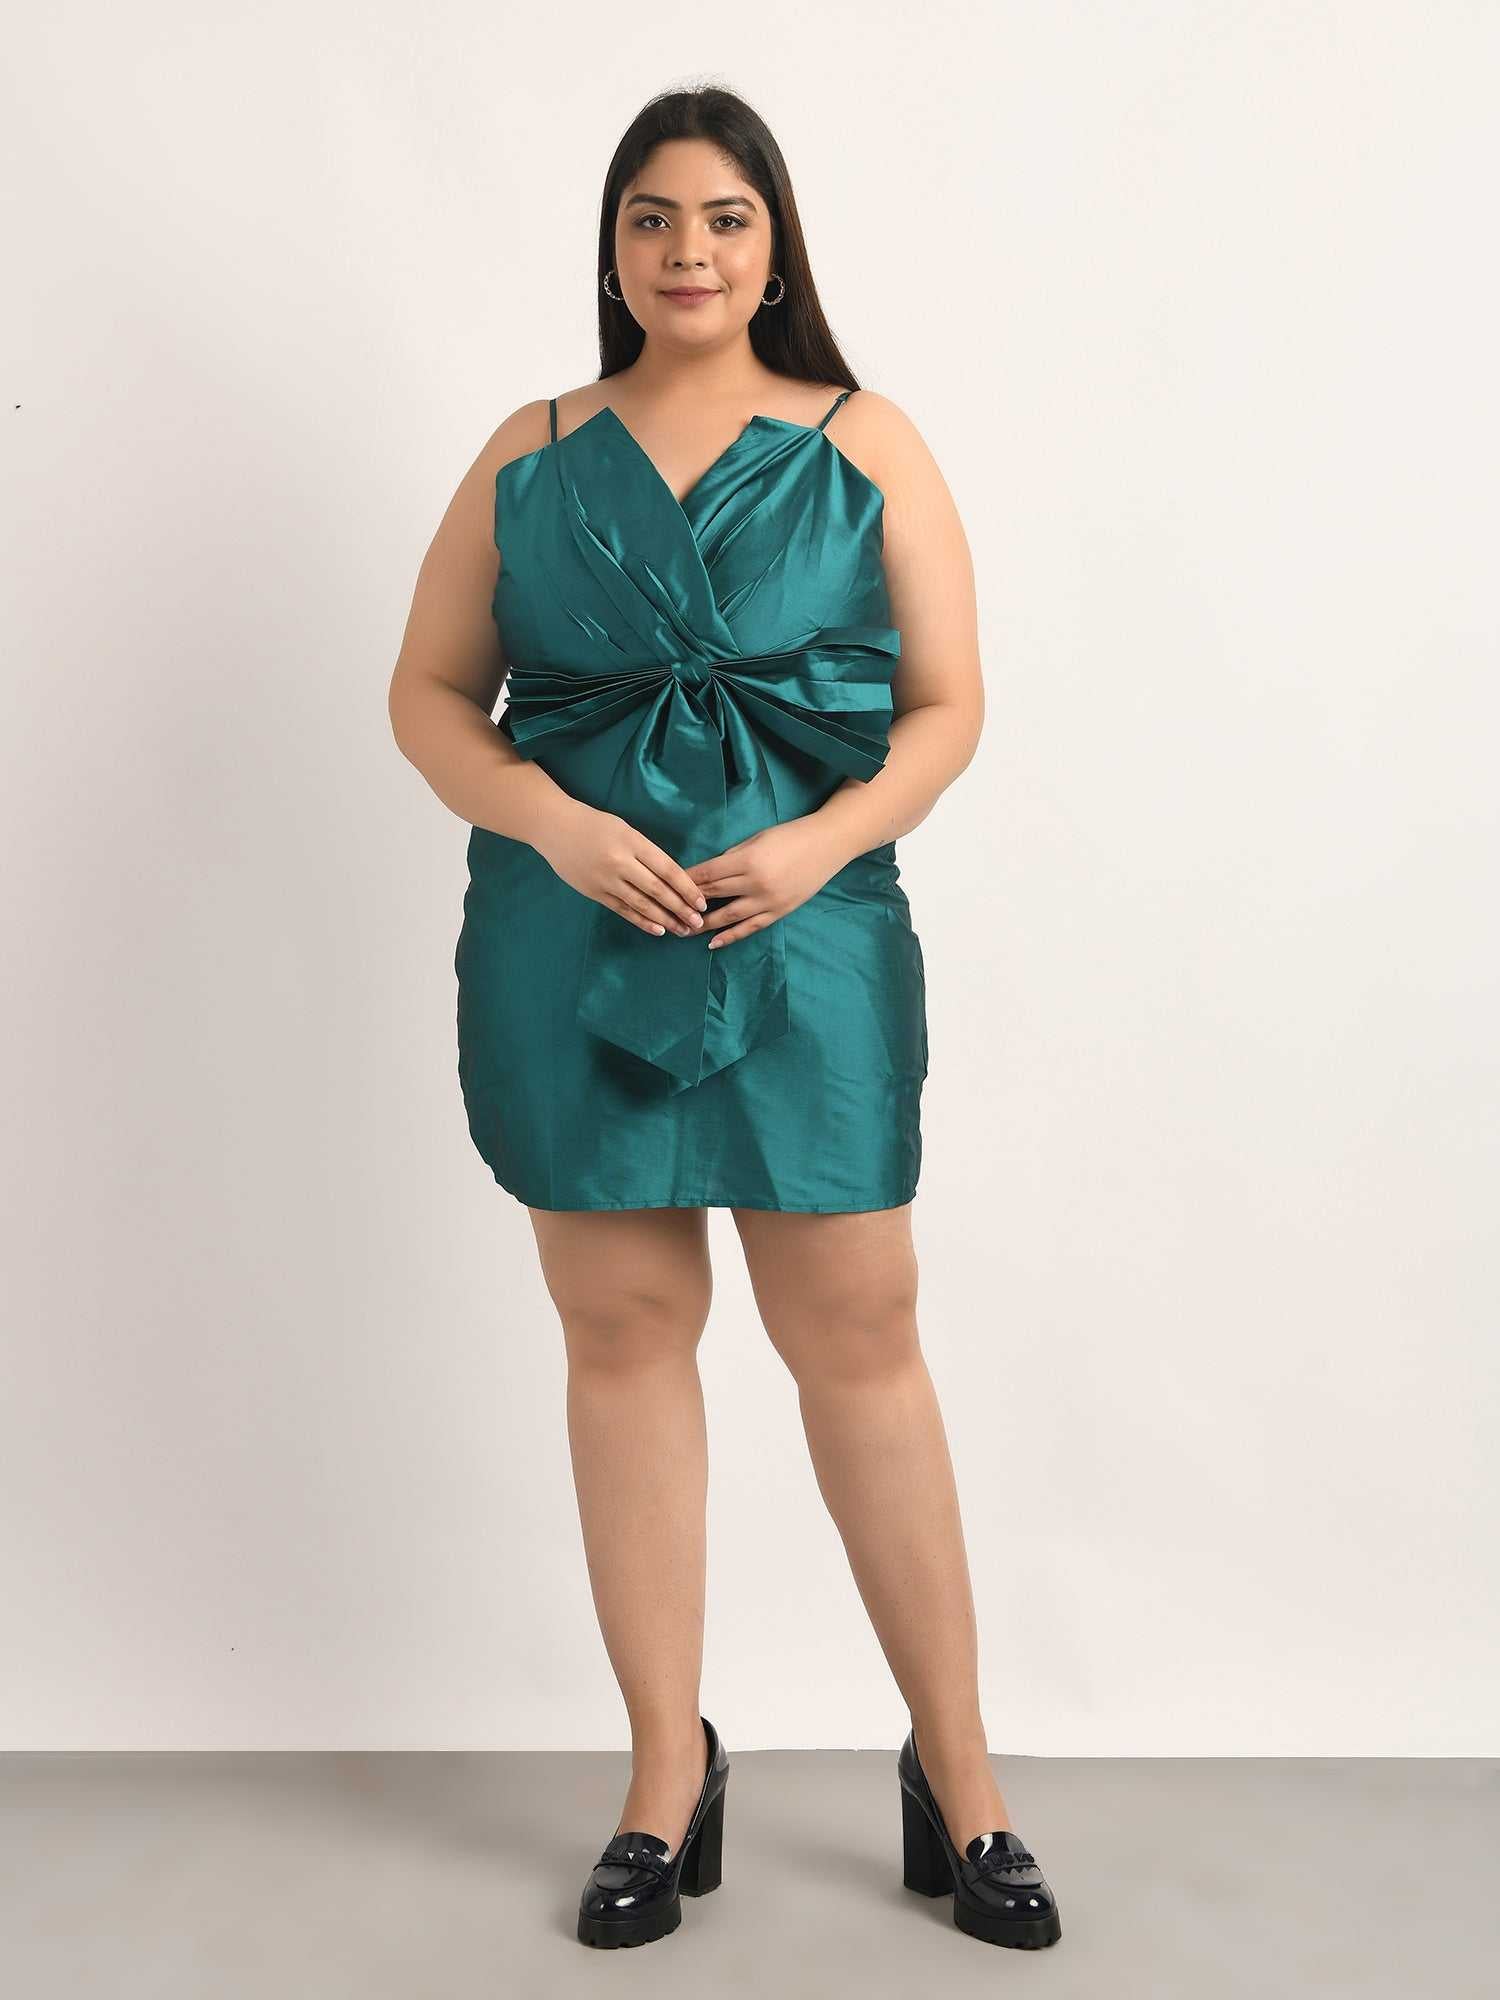 attic curves oversized knot teal dress